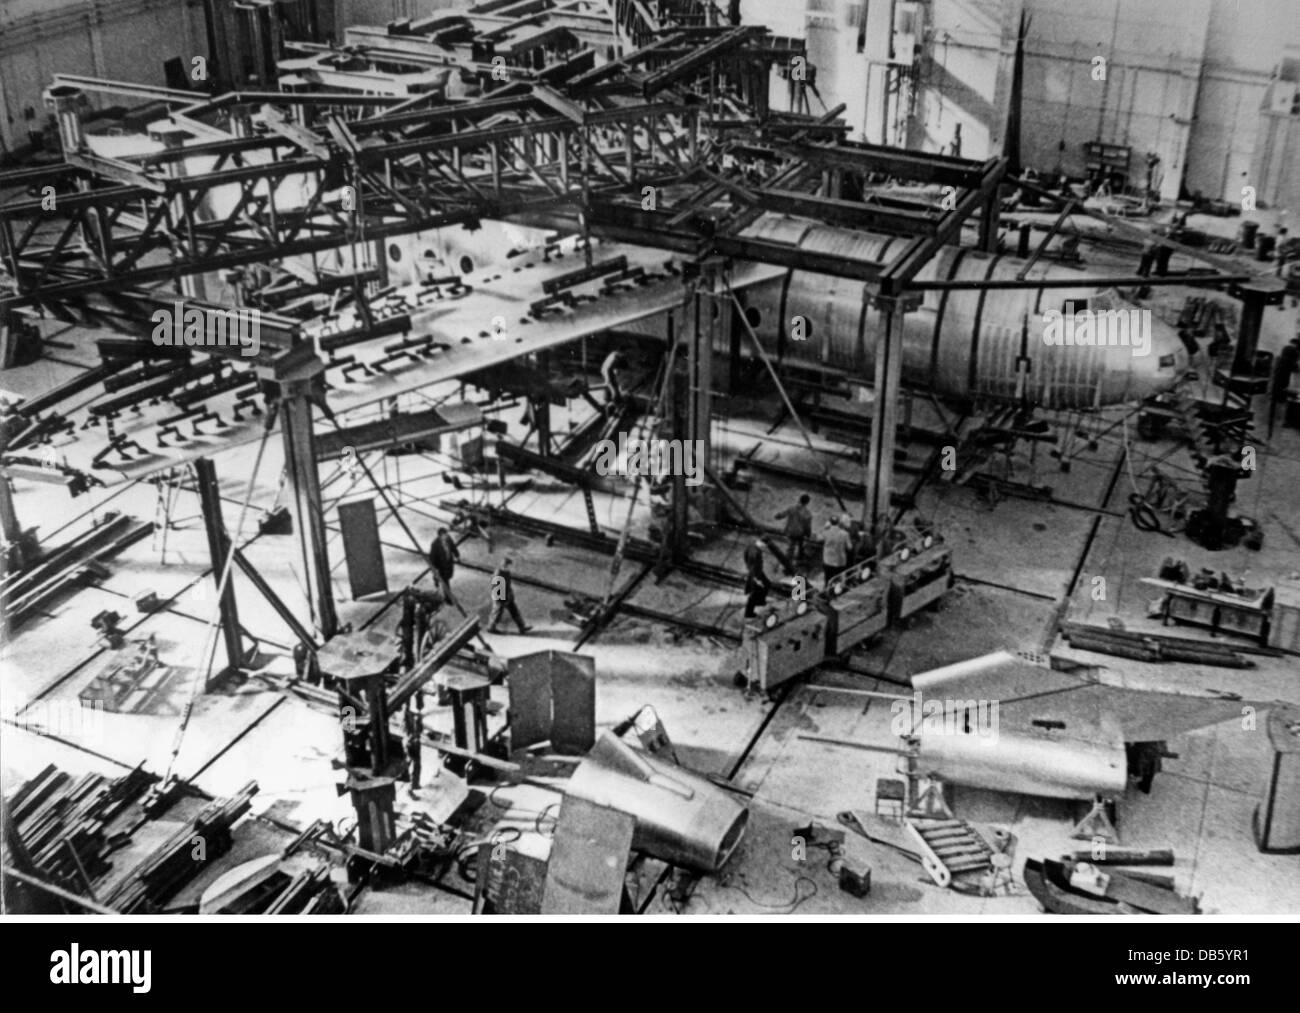 geography / travel, East Germany, industry, aircraft construction, jetplane Bade 152, hydraulic pressure test, VEB Flugzeugwerke Dresden, 28.10.1958, production, factory, works, airplane, 1950s, 50s, 20th century, historic, historical, people, Additional-Rights-Clearences-Not Available Stock Photo